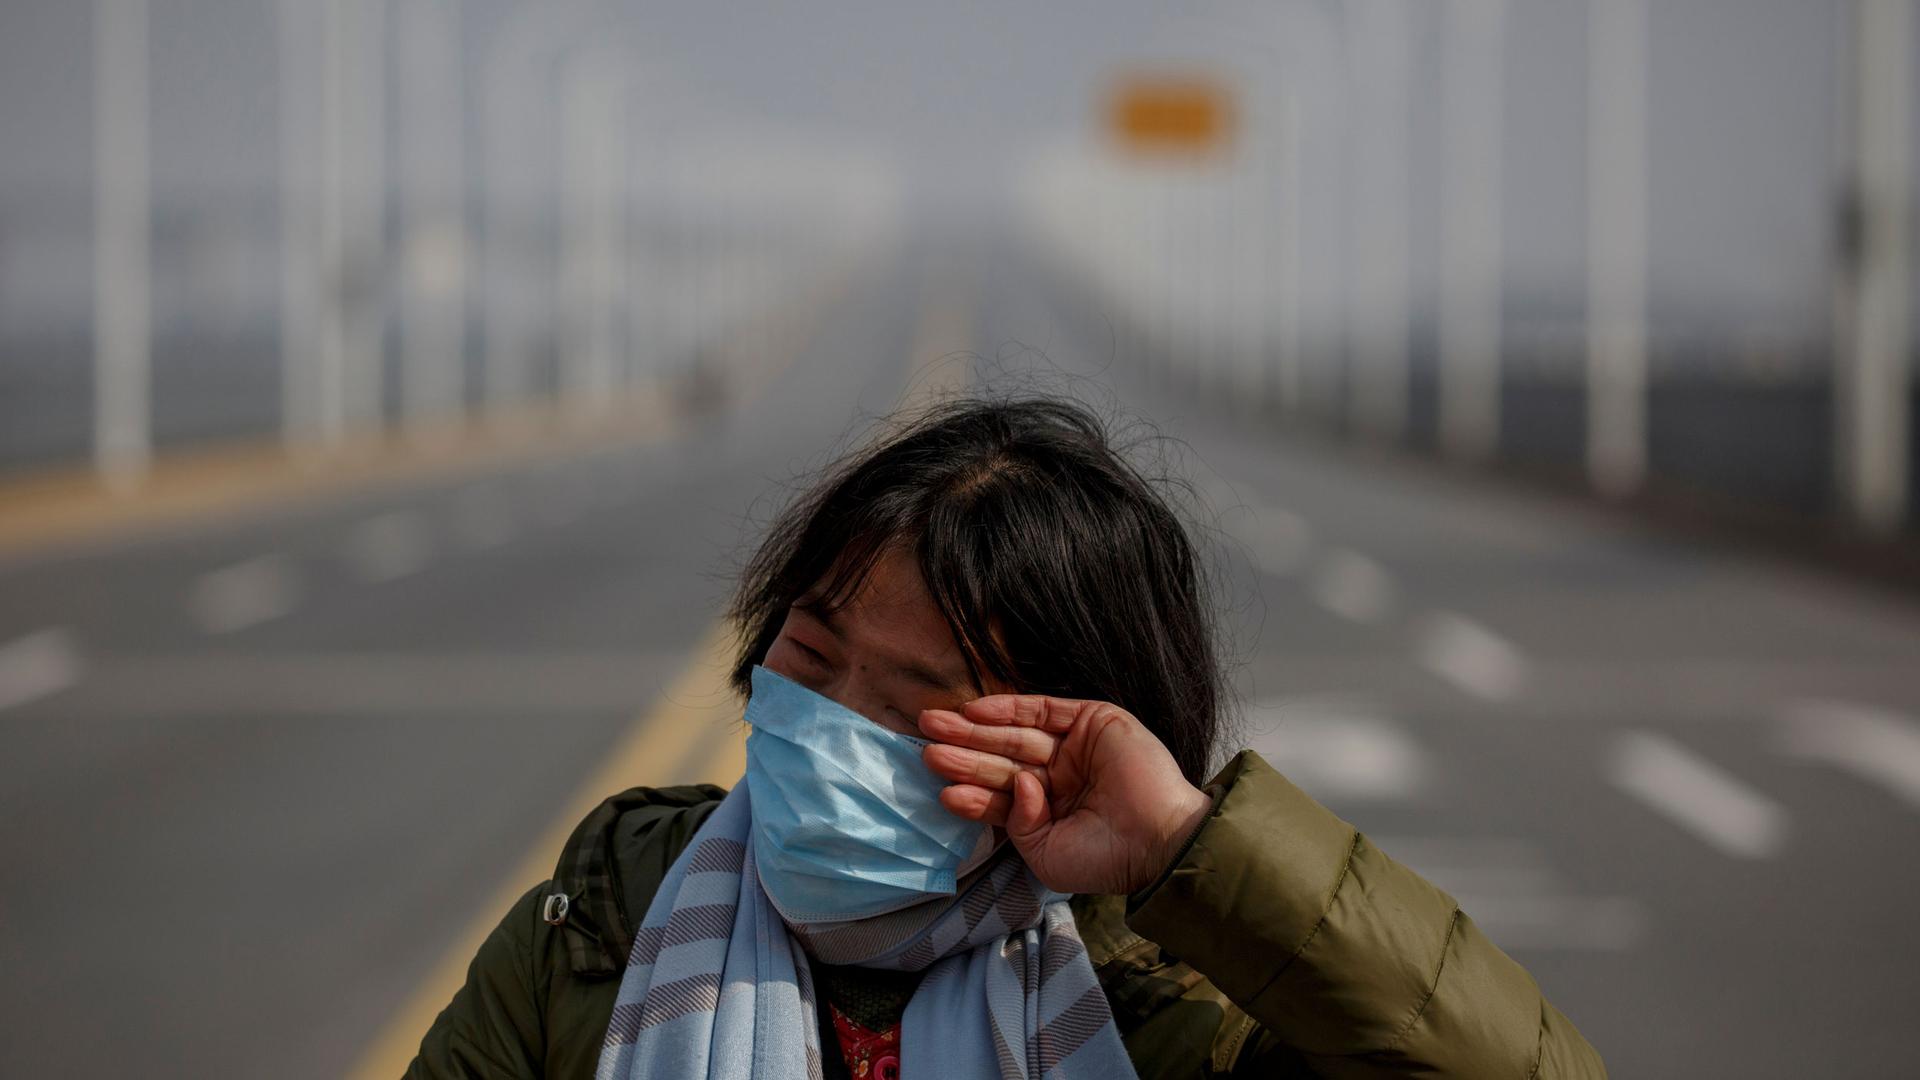 A woman is shown wearing a face mask and stripped scarf while standing on the edge of an empty bridge.